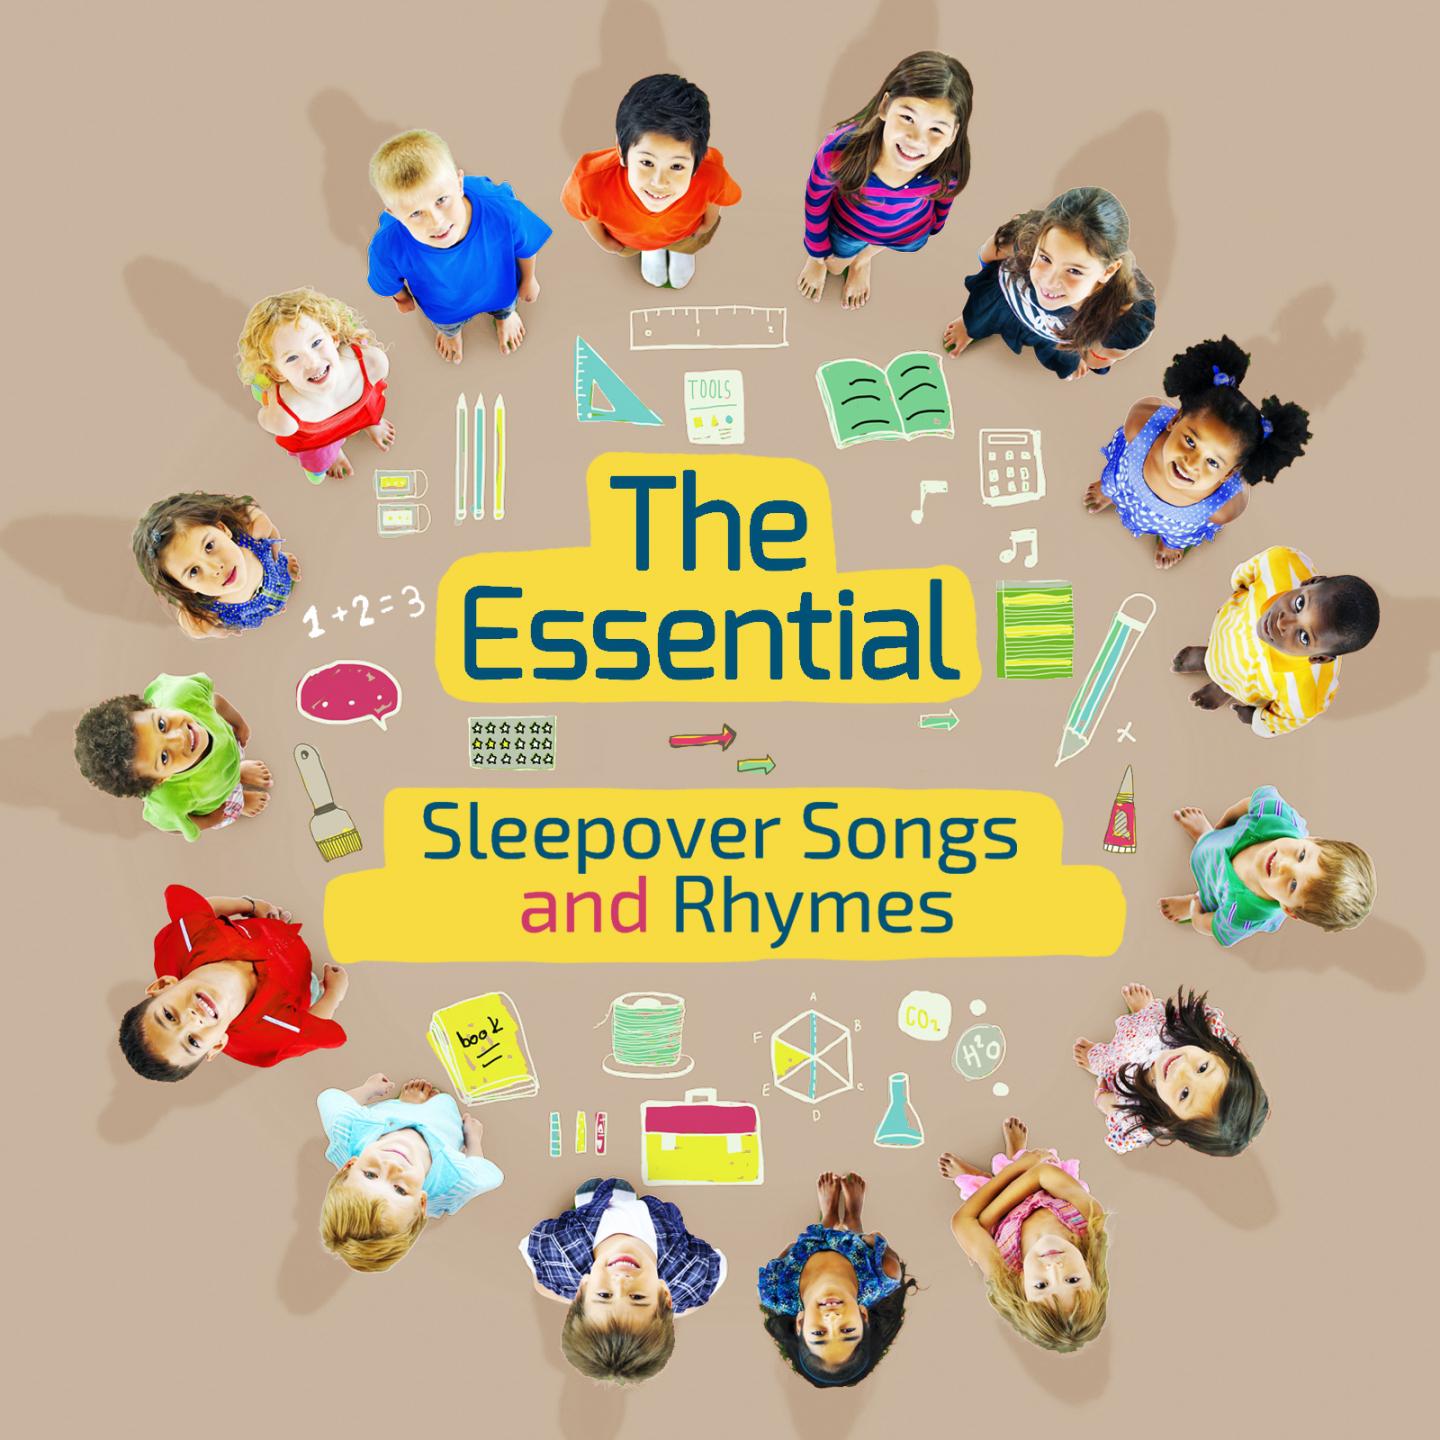 The Essential Sleepover Songs and Rhymes